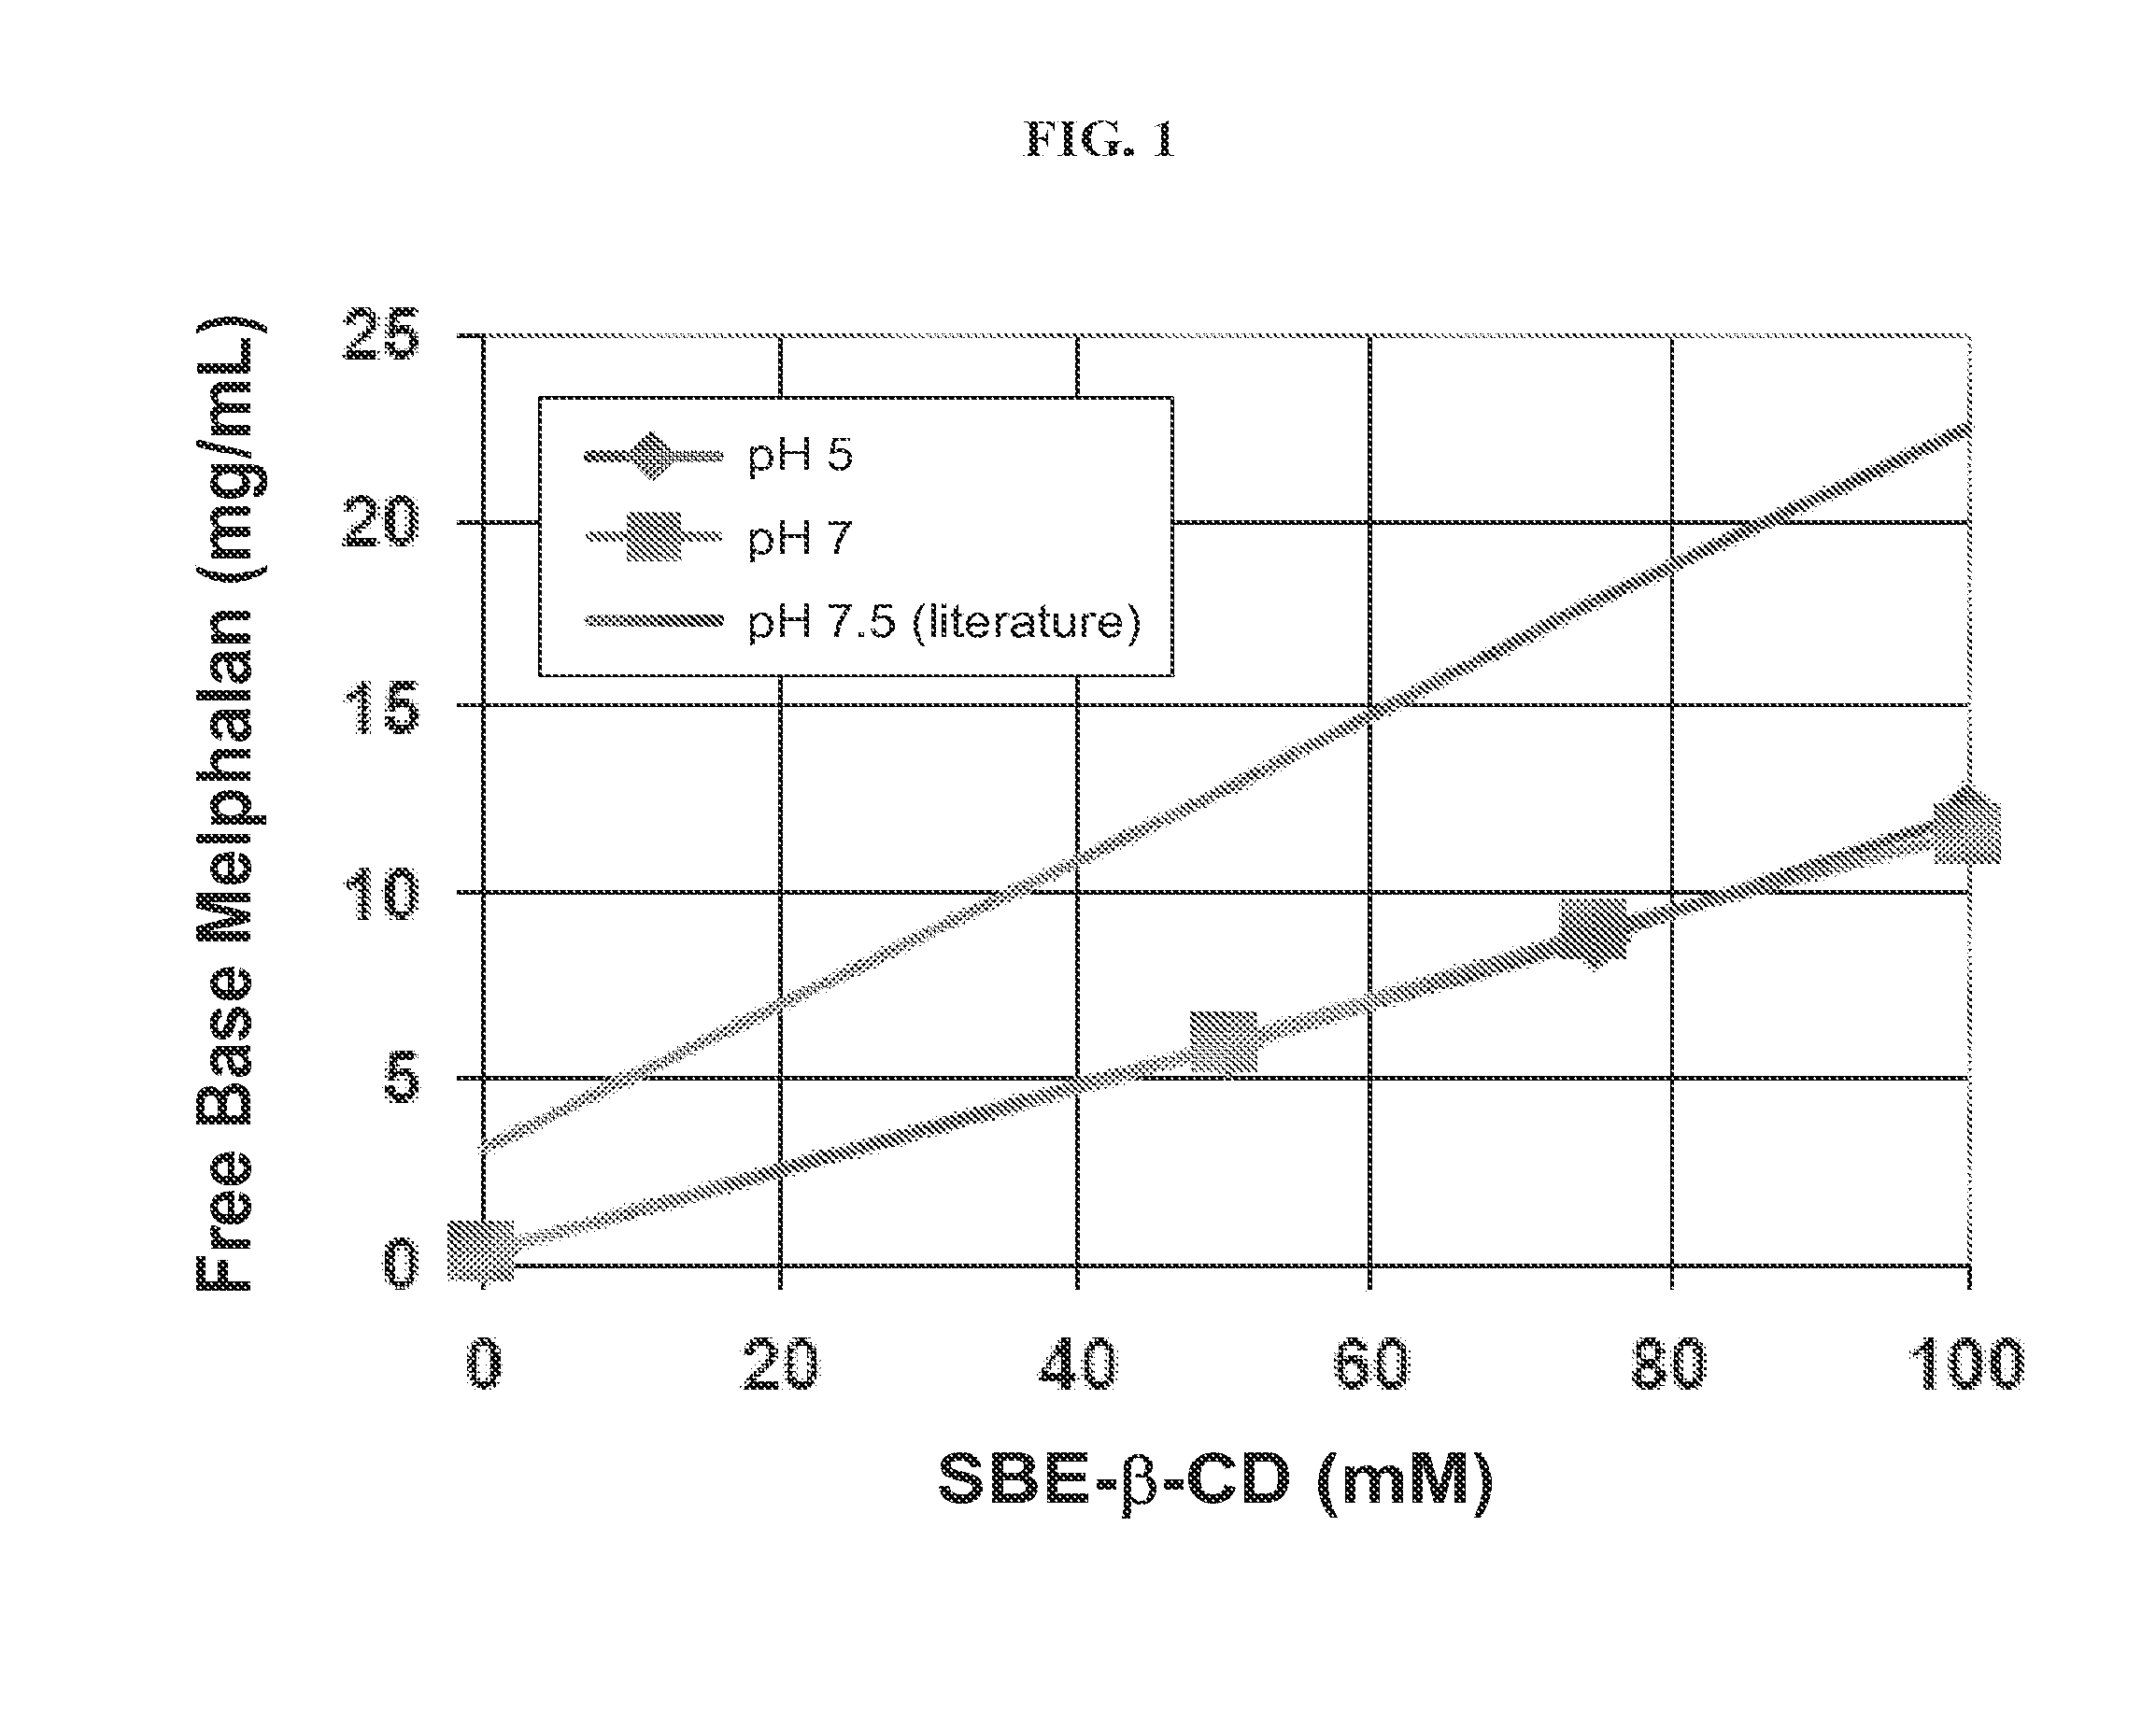 Injectable Nitrogen Mustard Compositions Comprising a Cyclodextrin Derivative and Methods of Making and Using the Same